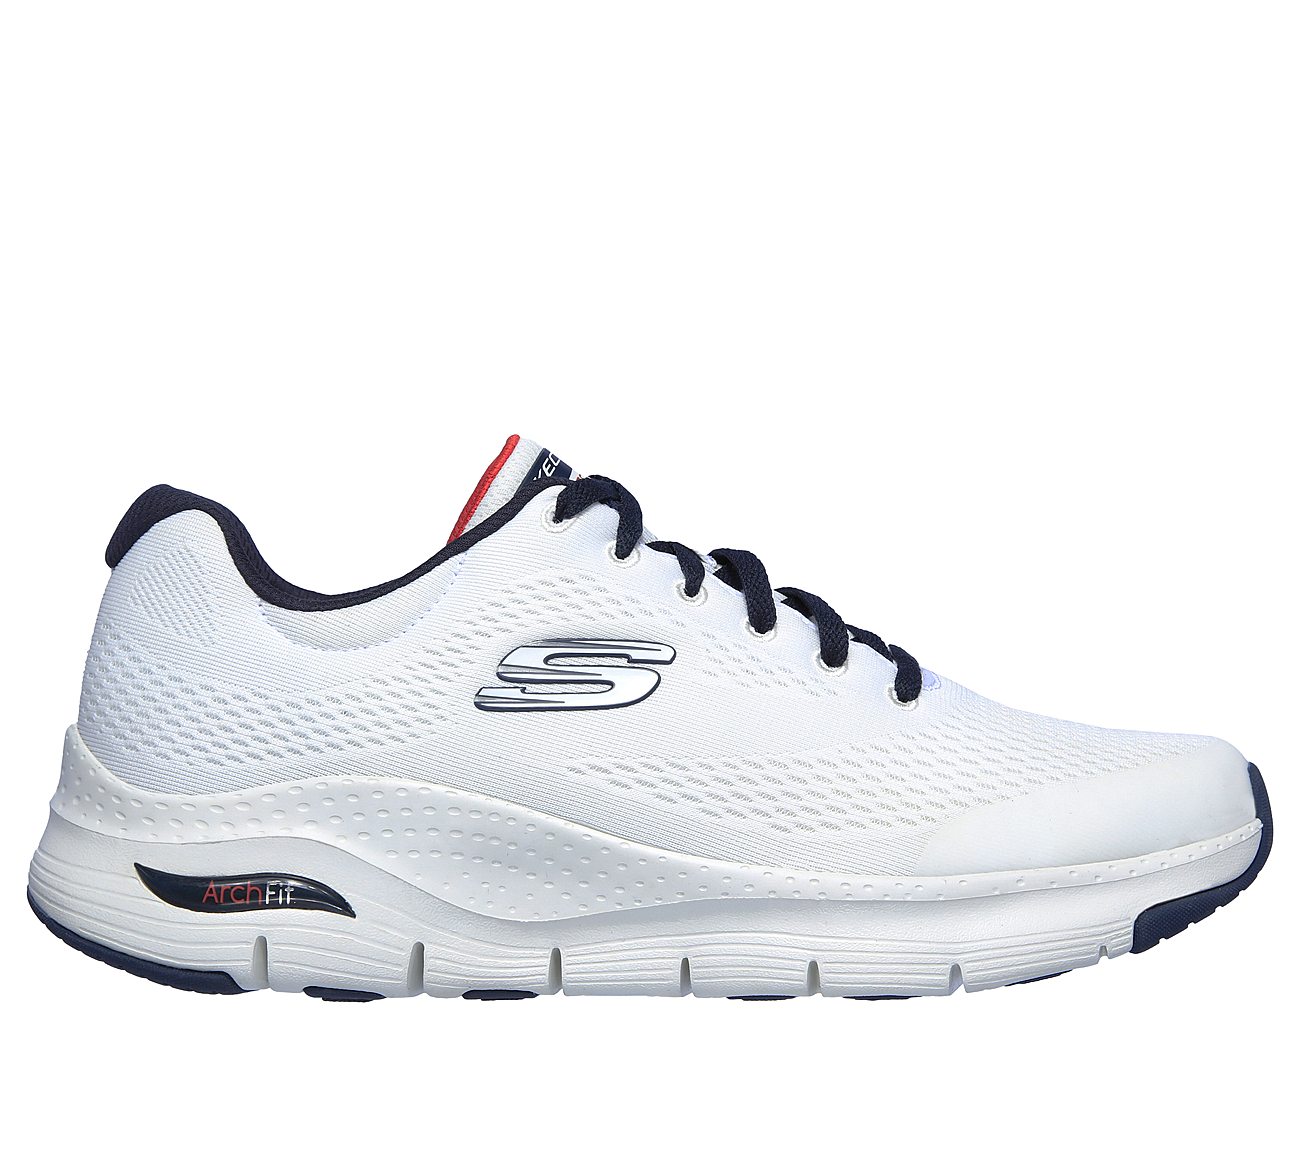 skechers breathable shoes